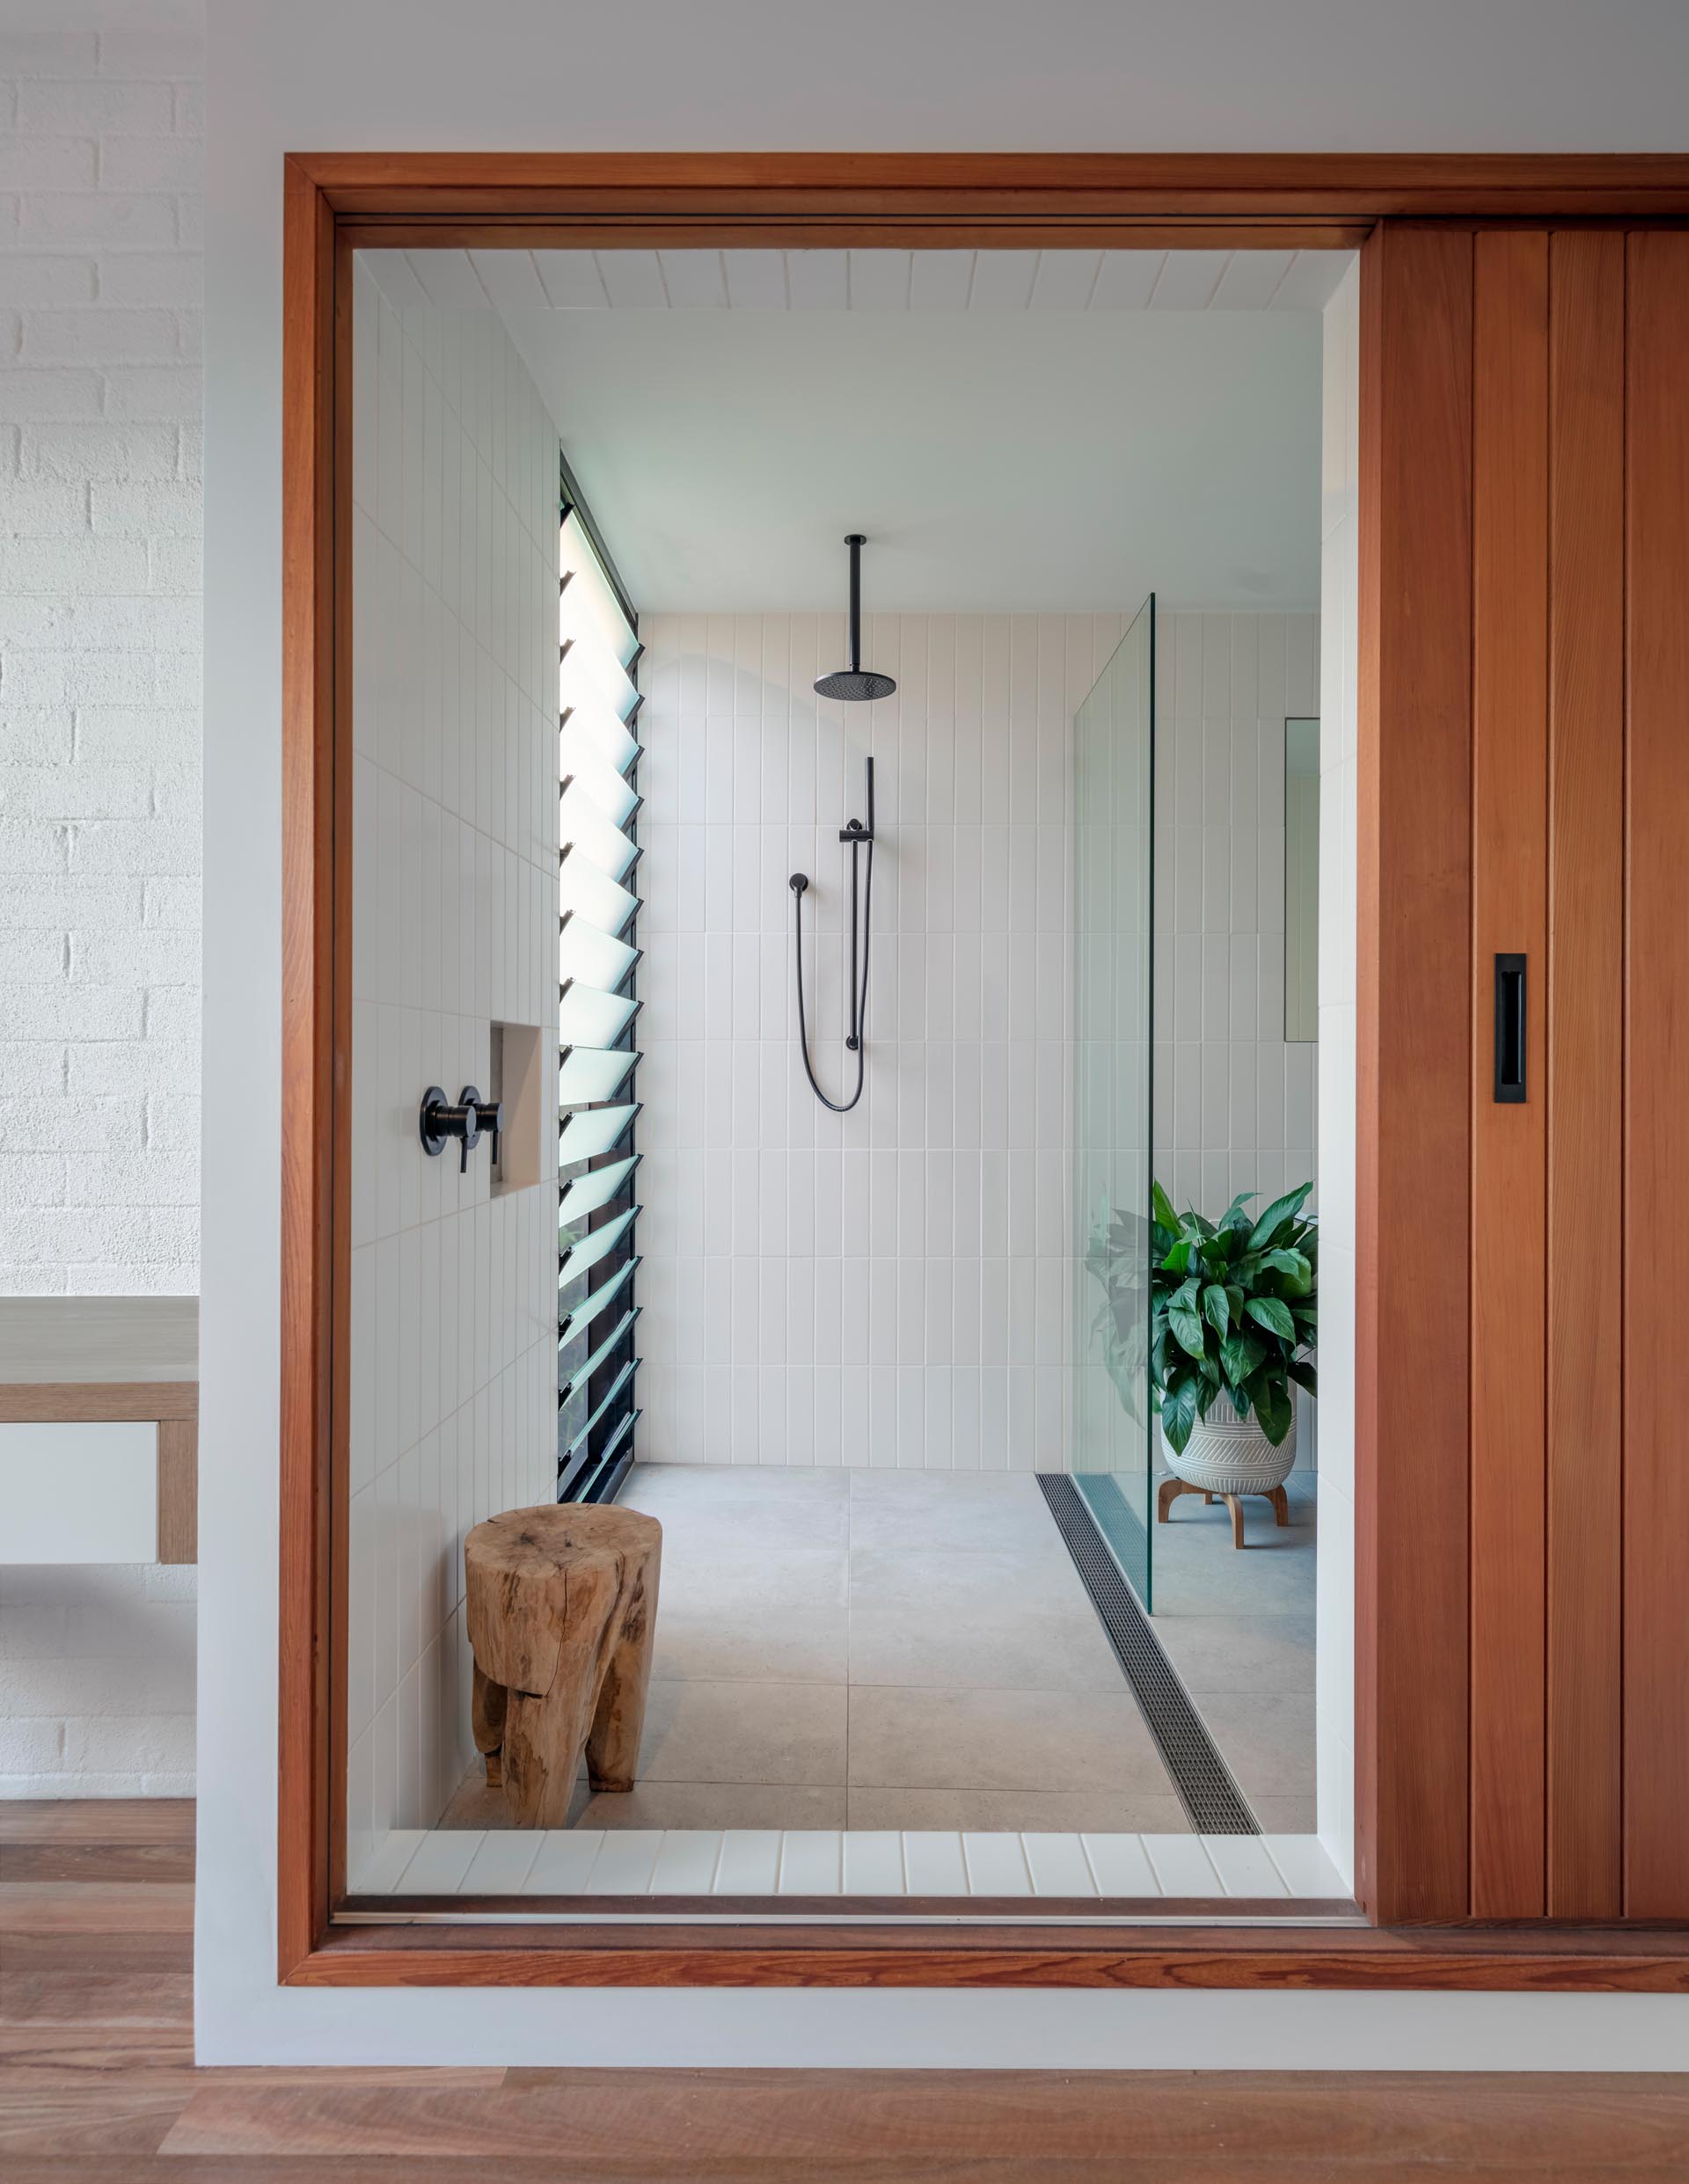 A modern bathroom with white rectangular tiles and a louver window in the shower.